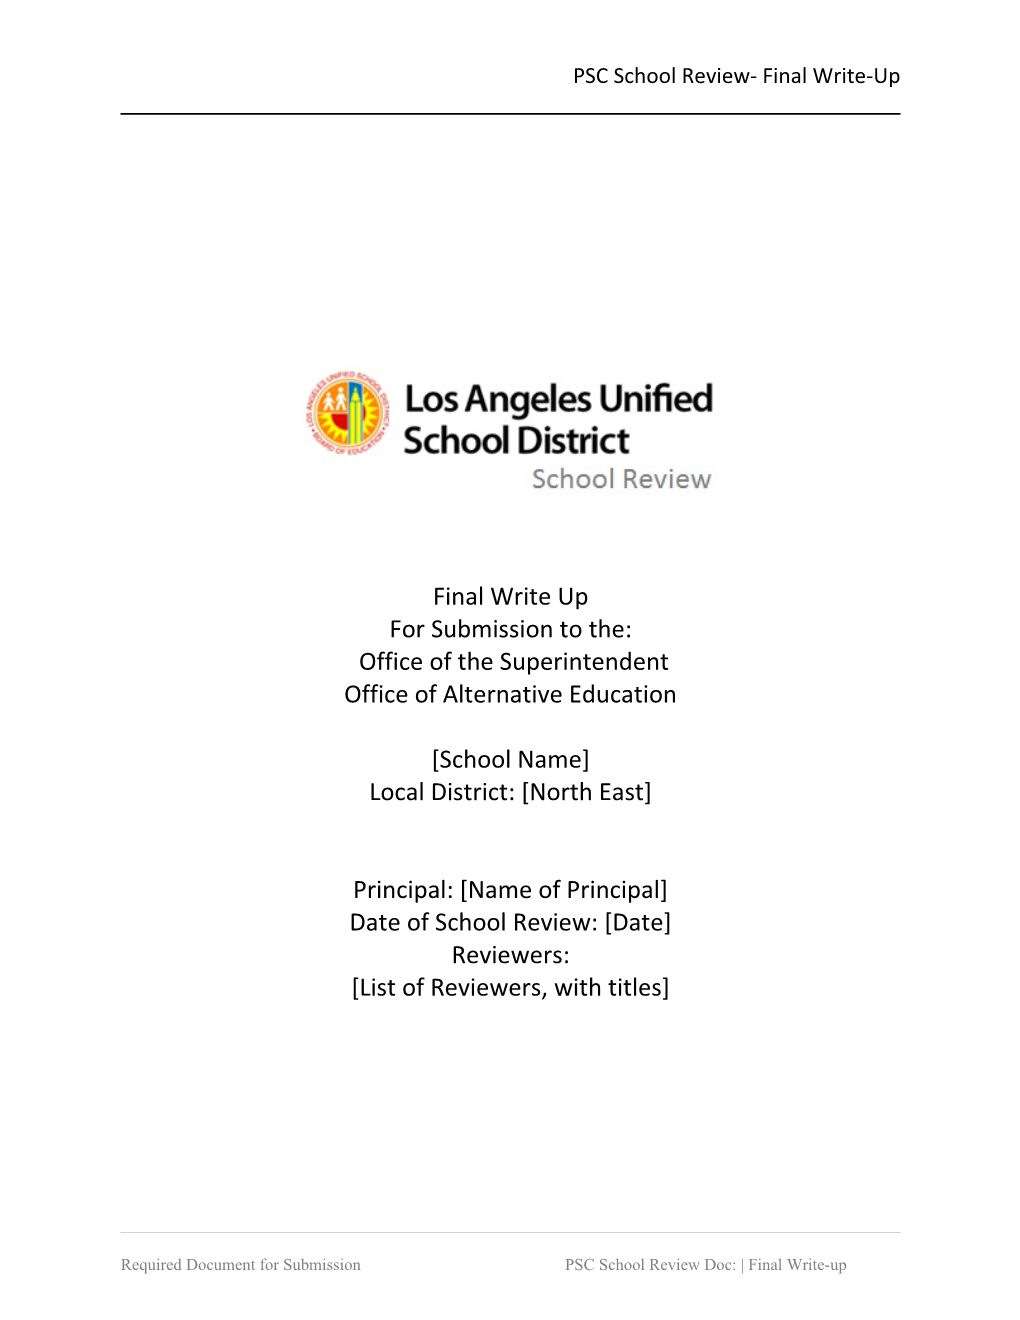 Los Angeles Unified School District s8